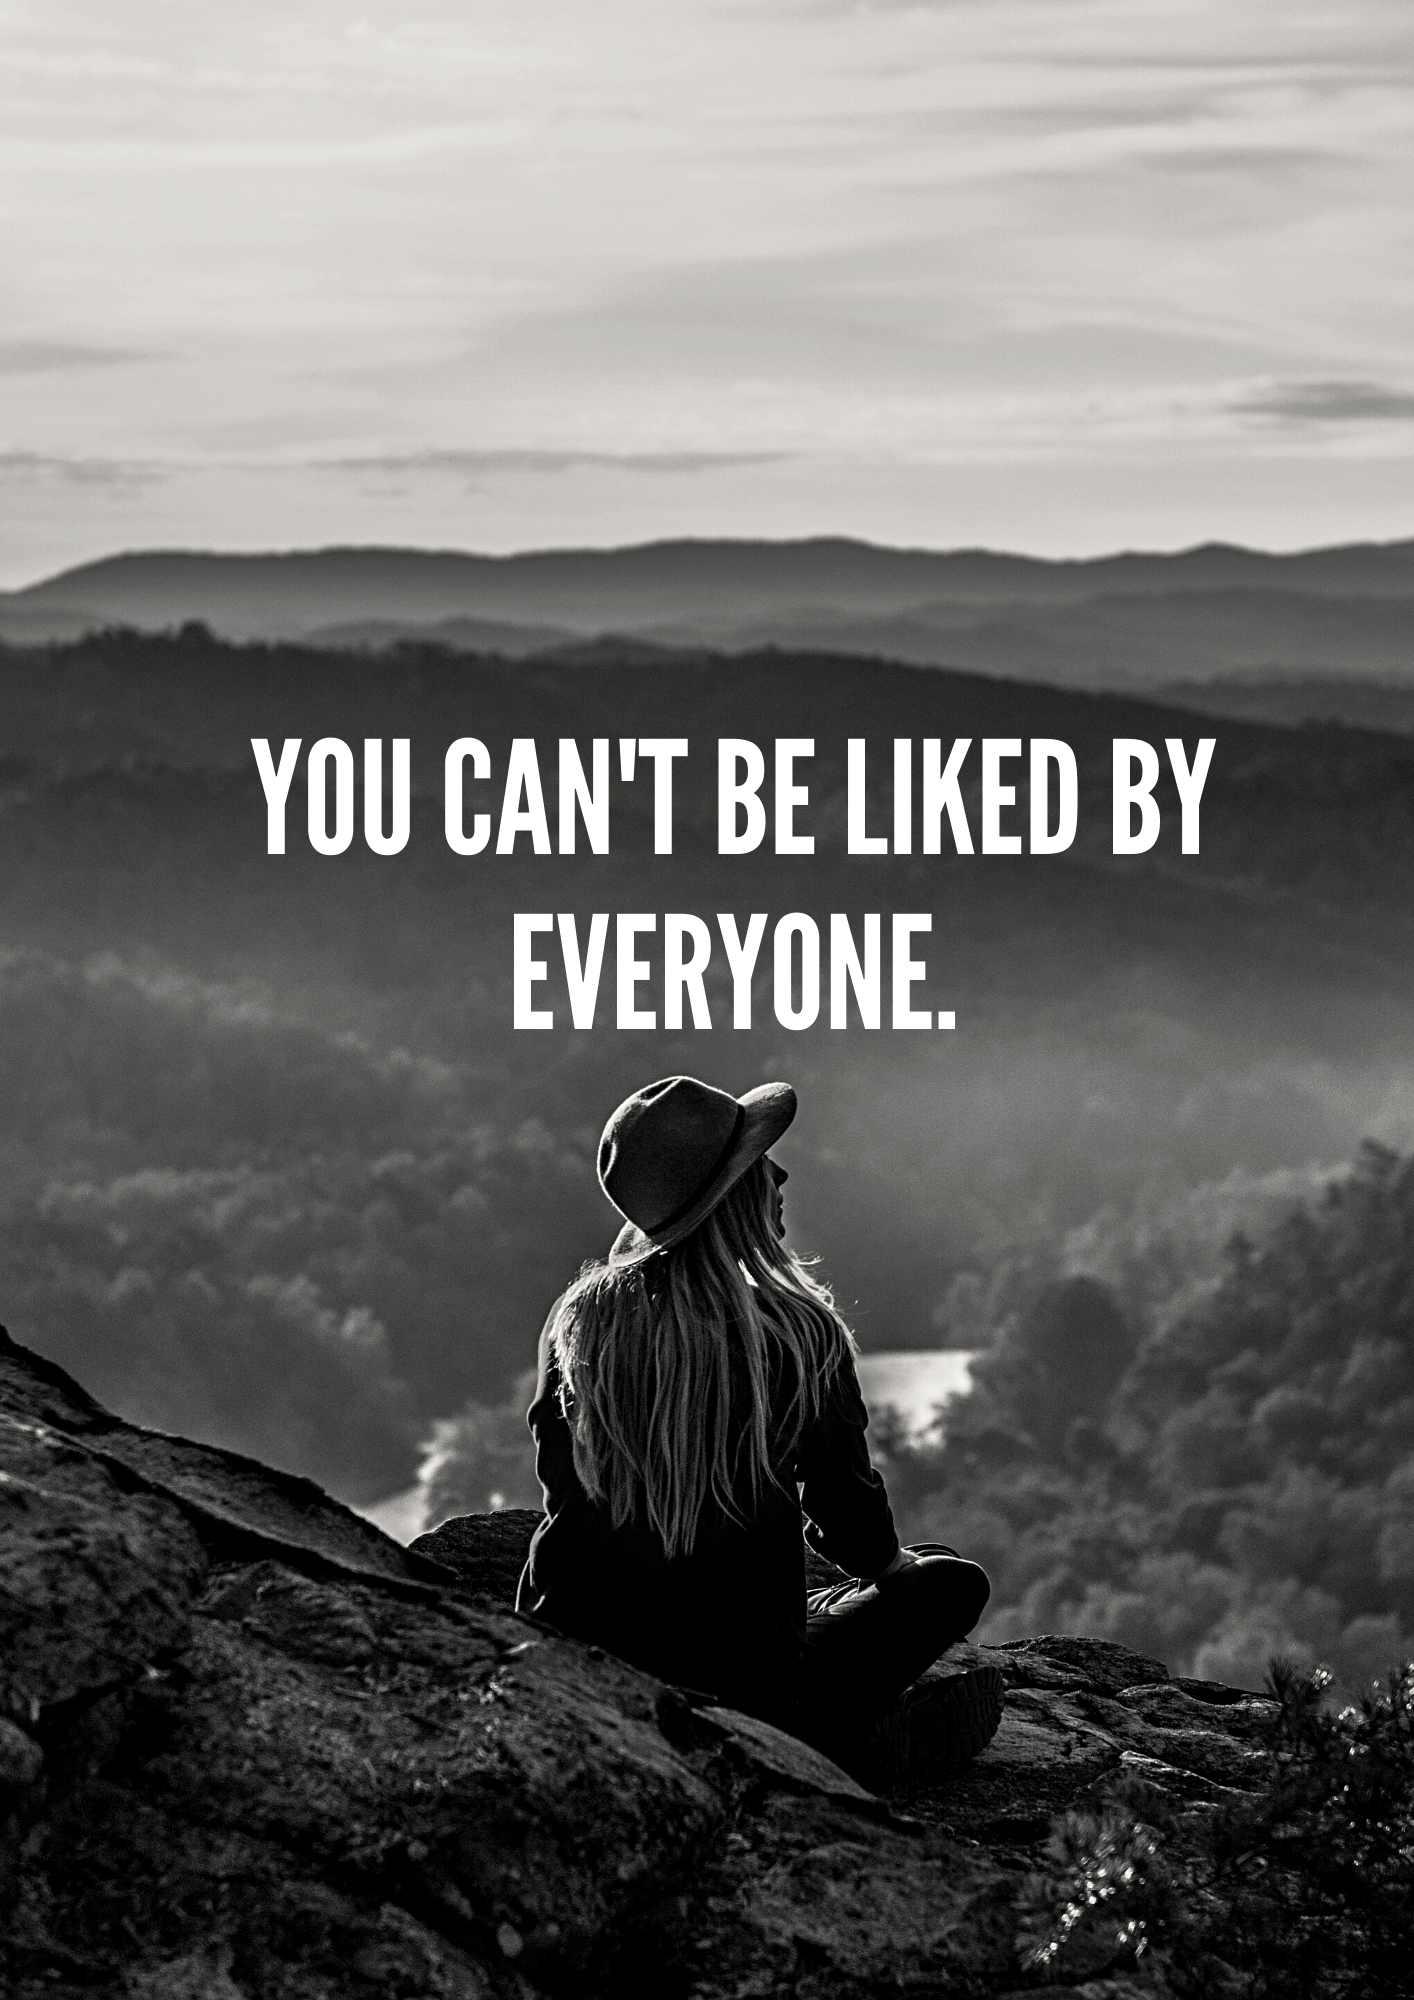 you can't be liked by everyone.